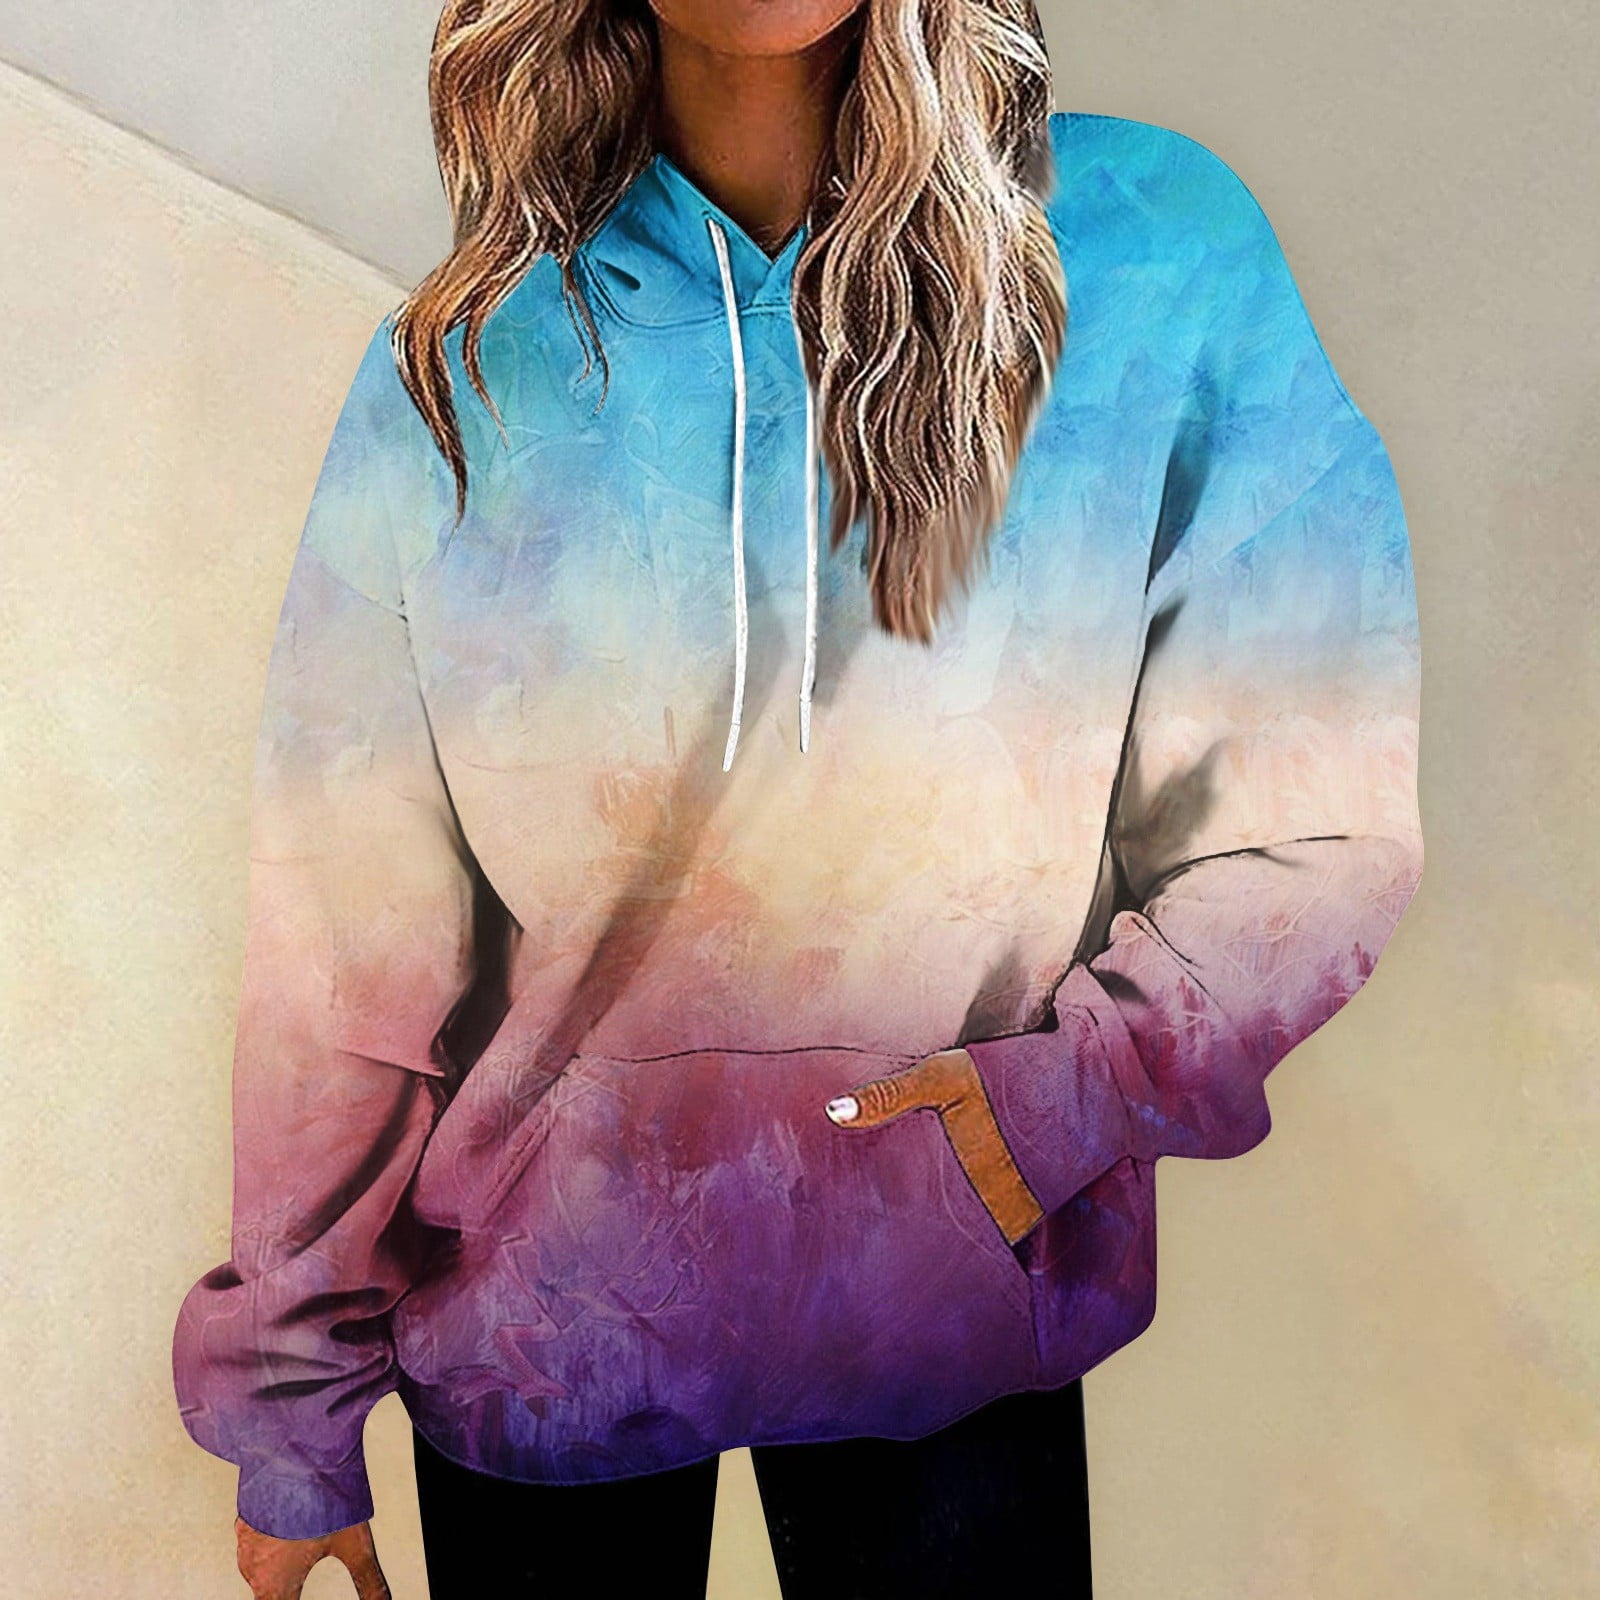  Yck-SAiWed Overstock Items Clearance All Prime Womens  Sweatshirts Trendy Oversized Graphic Tees Discount Prime Membership  Lightning Deals Of Today Prime Clearance : Sports & Outdoors